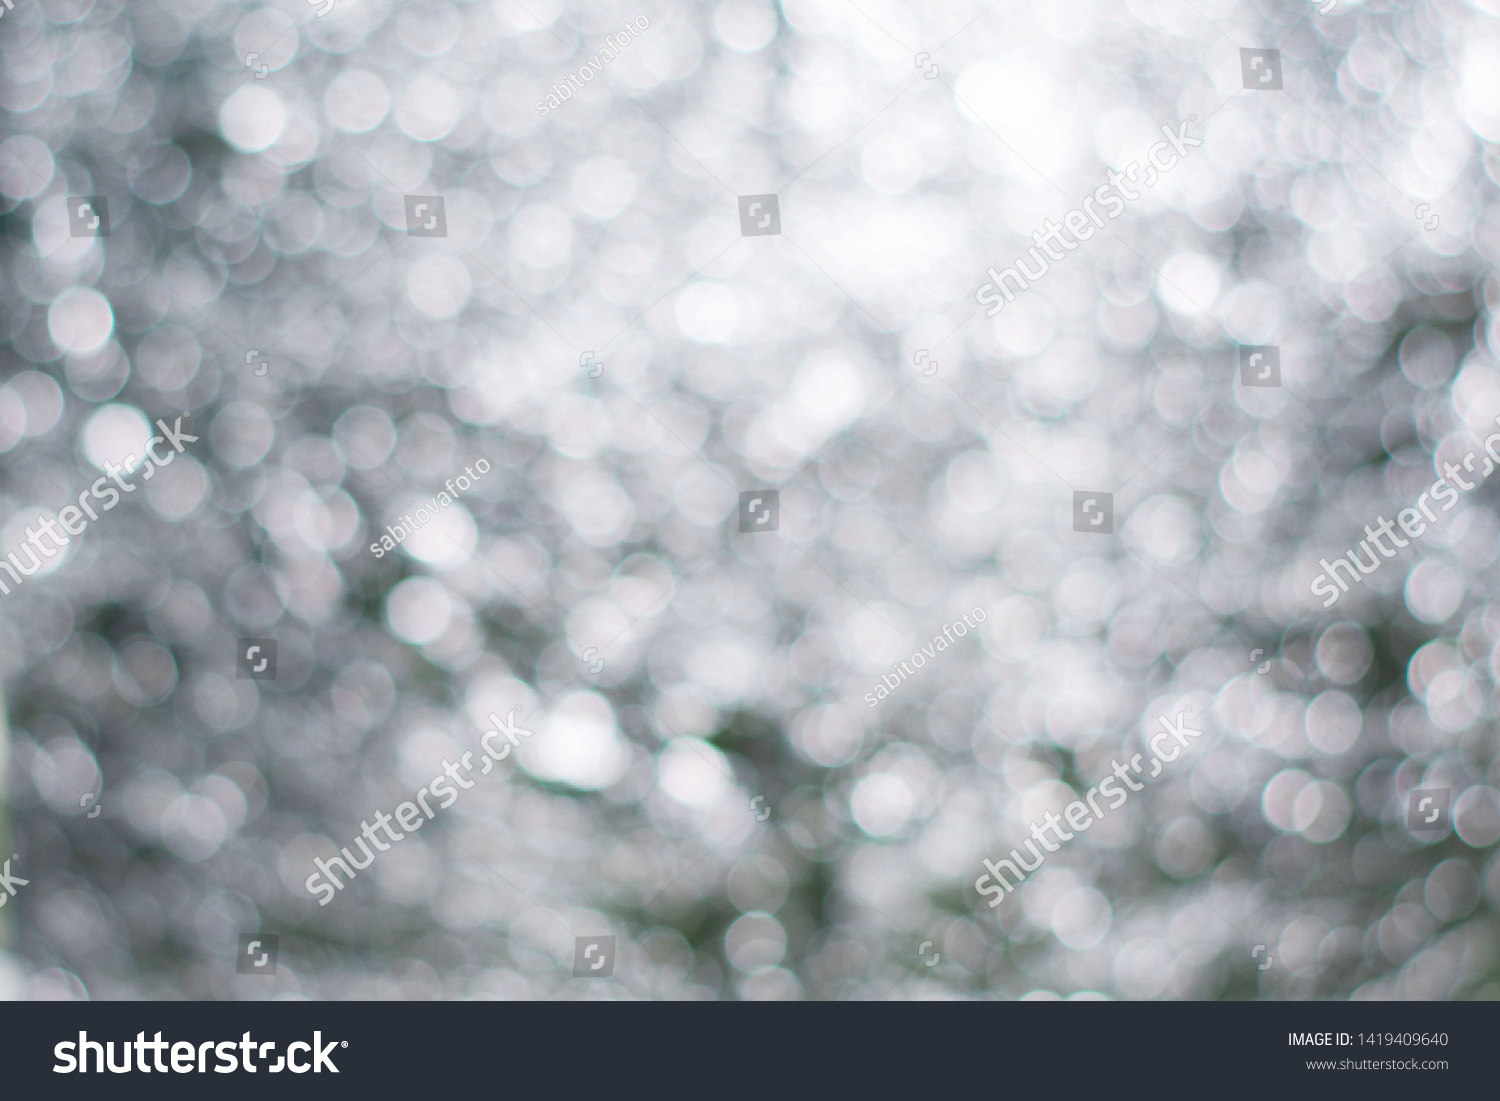 Blurred view of abstract silver background. Bokeh effect #1419409640